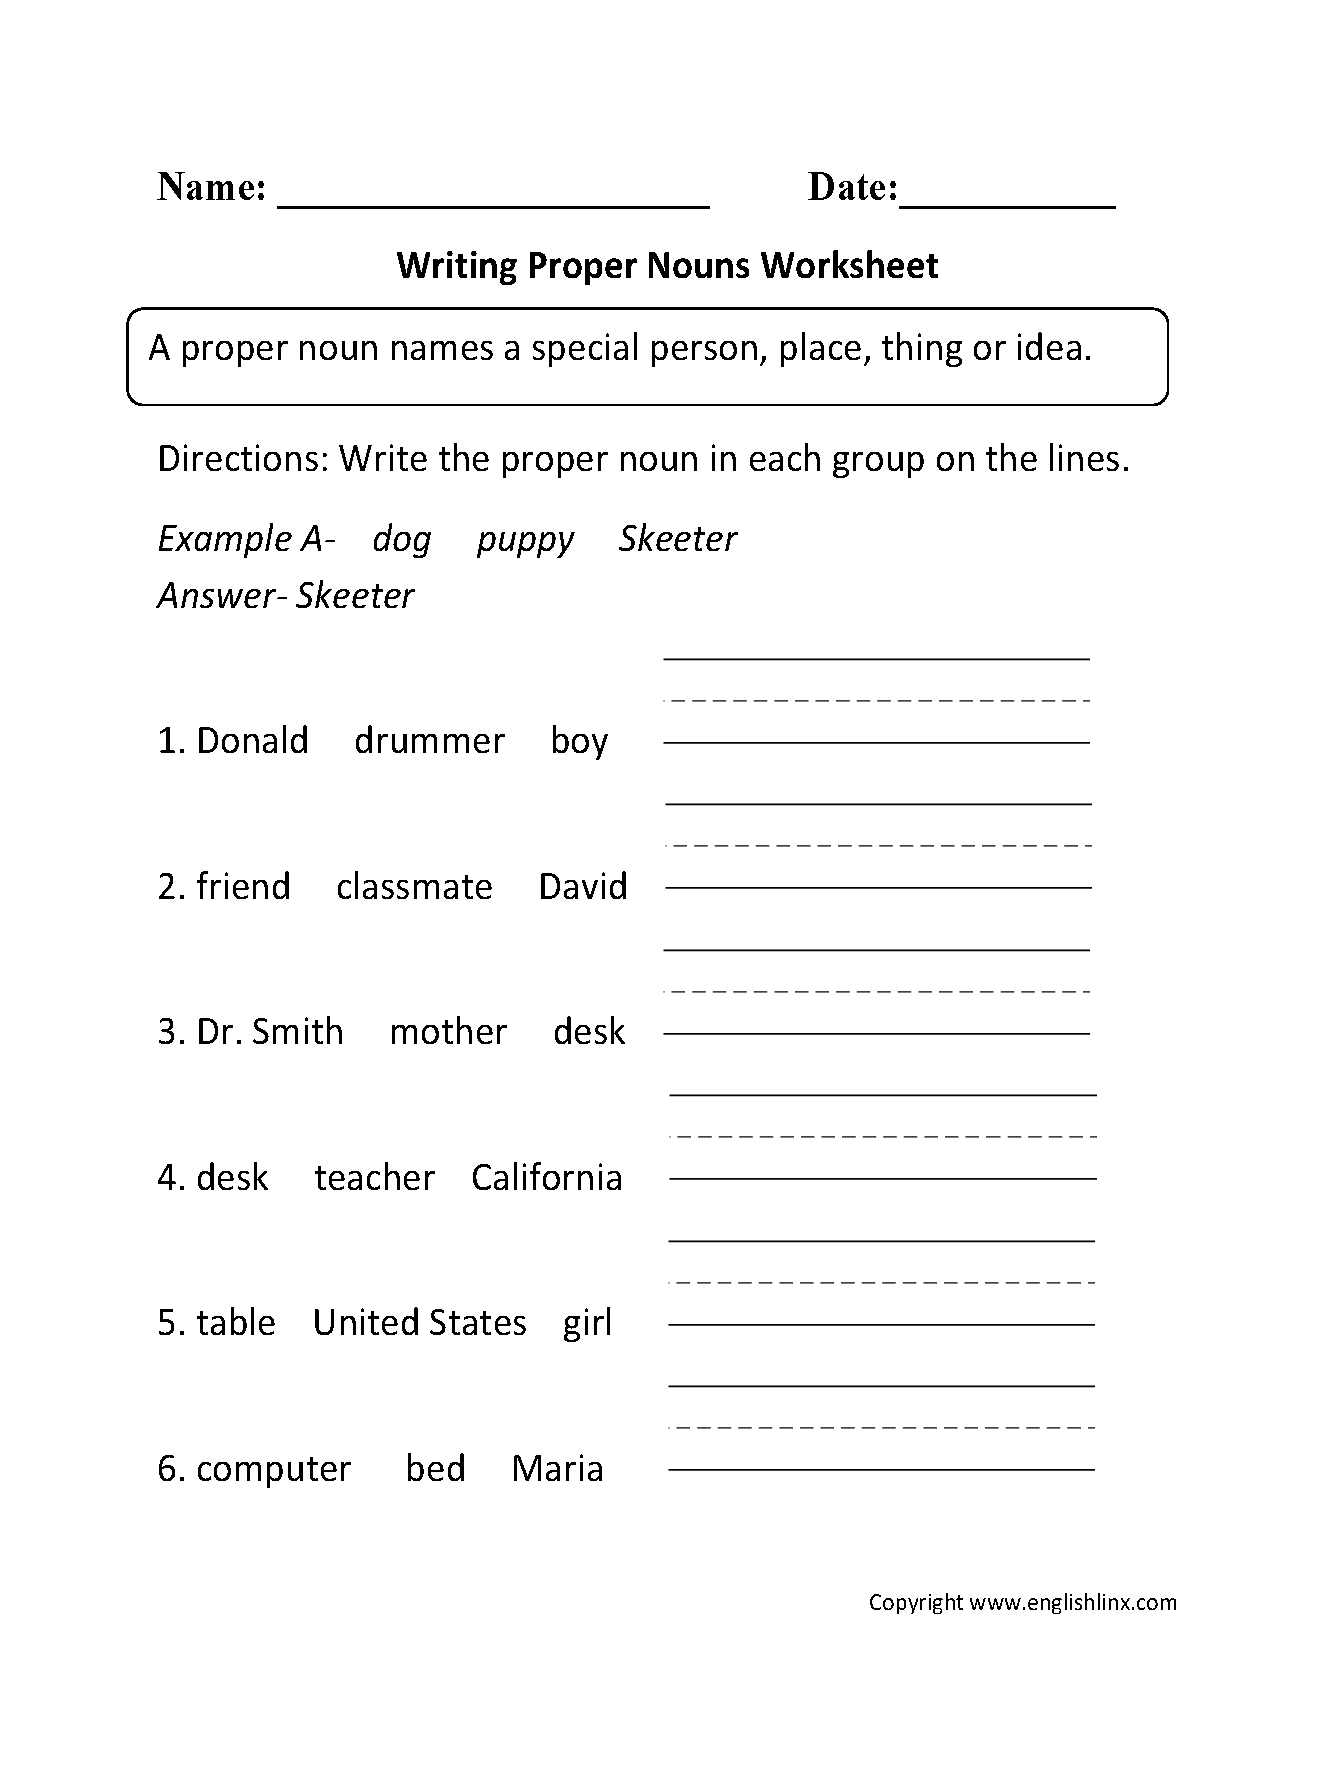 Proper and Common Nouns Worksheets  Writing Proper Nouns Worksheet Regarding Proper Nouns Worksheet 2nd Grade